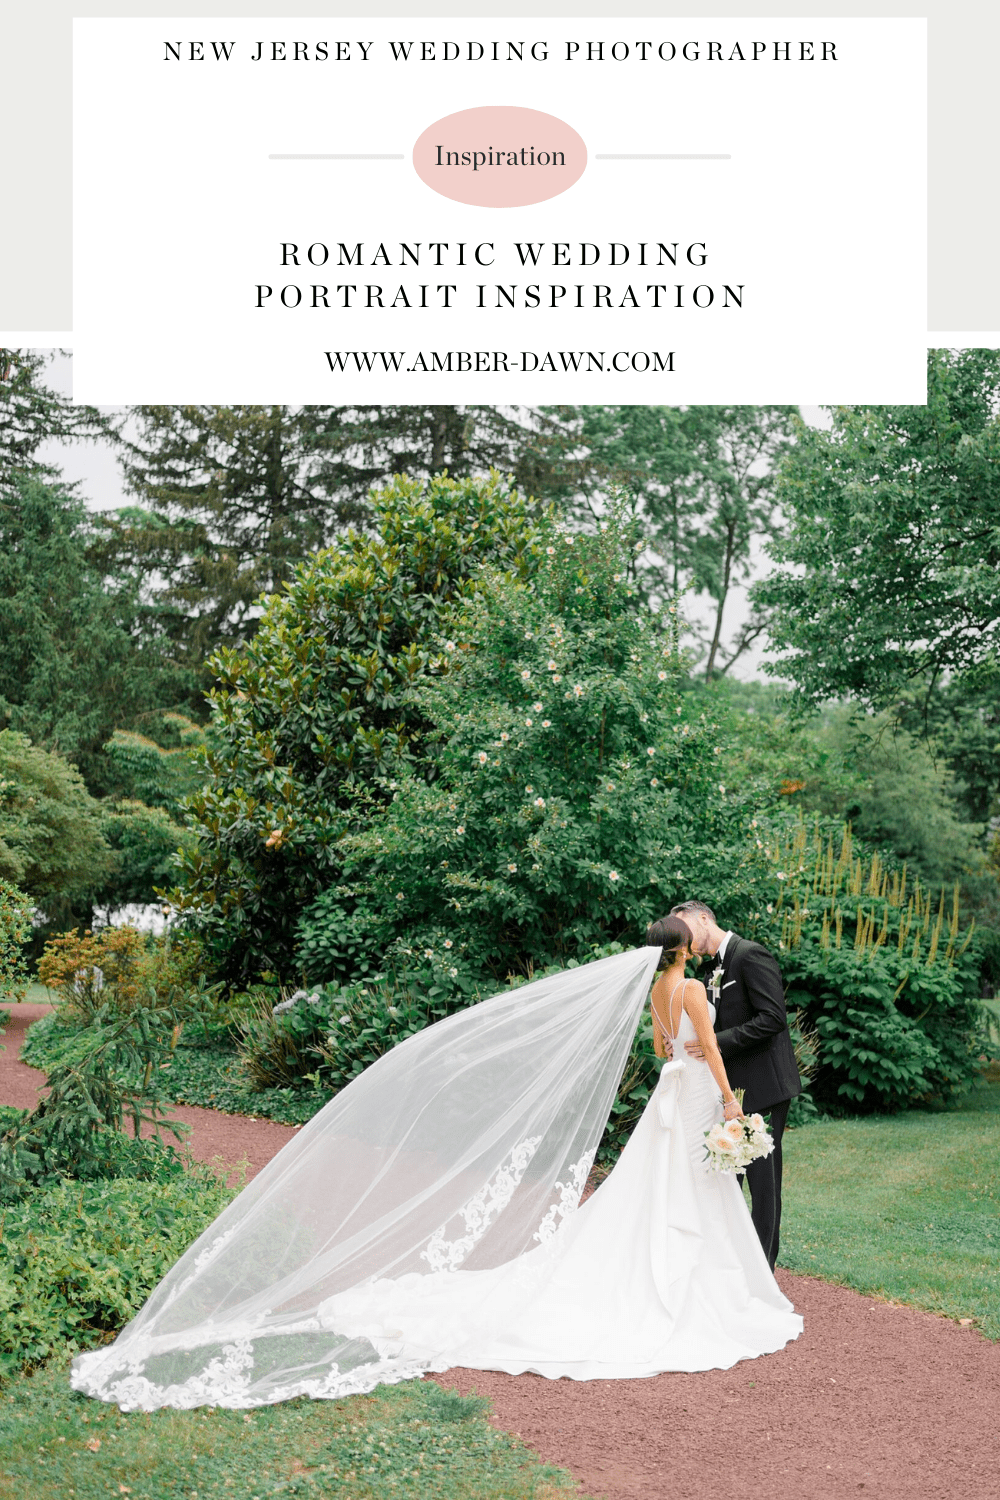 Romantic wedding portraits from The Inn at Fernbrook Farms wedding photographed by NJ wedding photographer Amber Dawn Photography